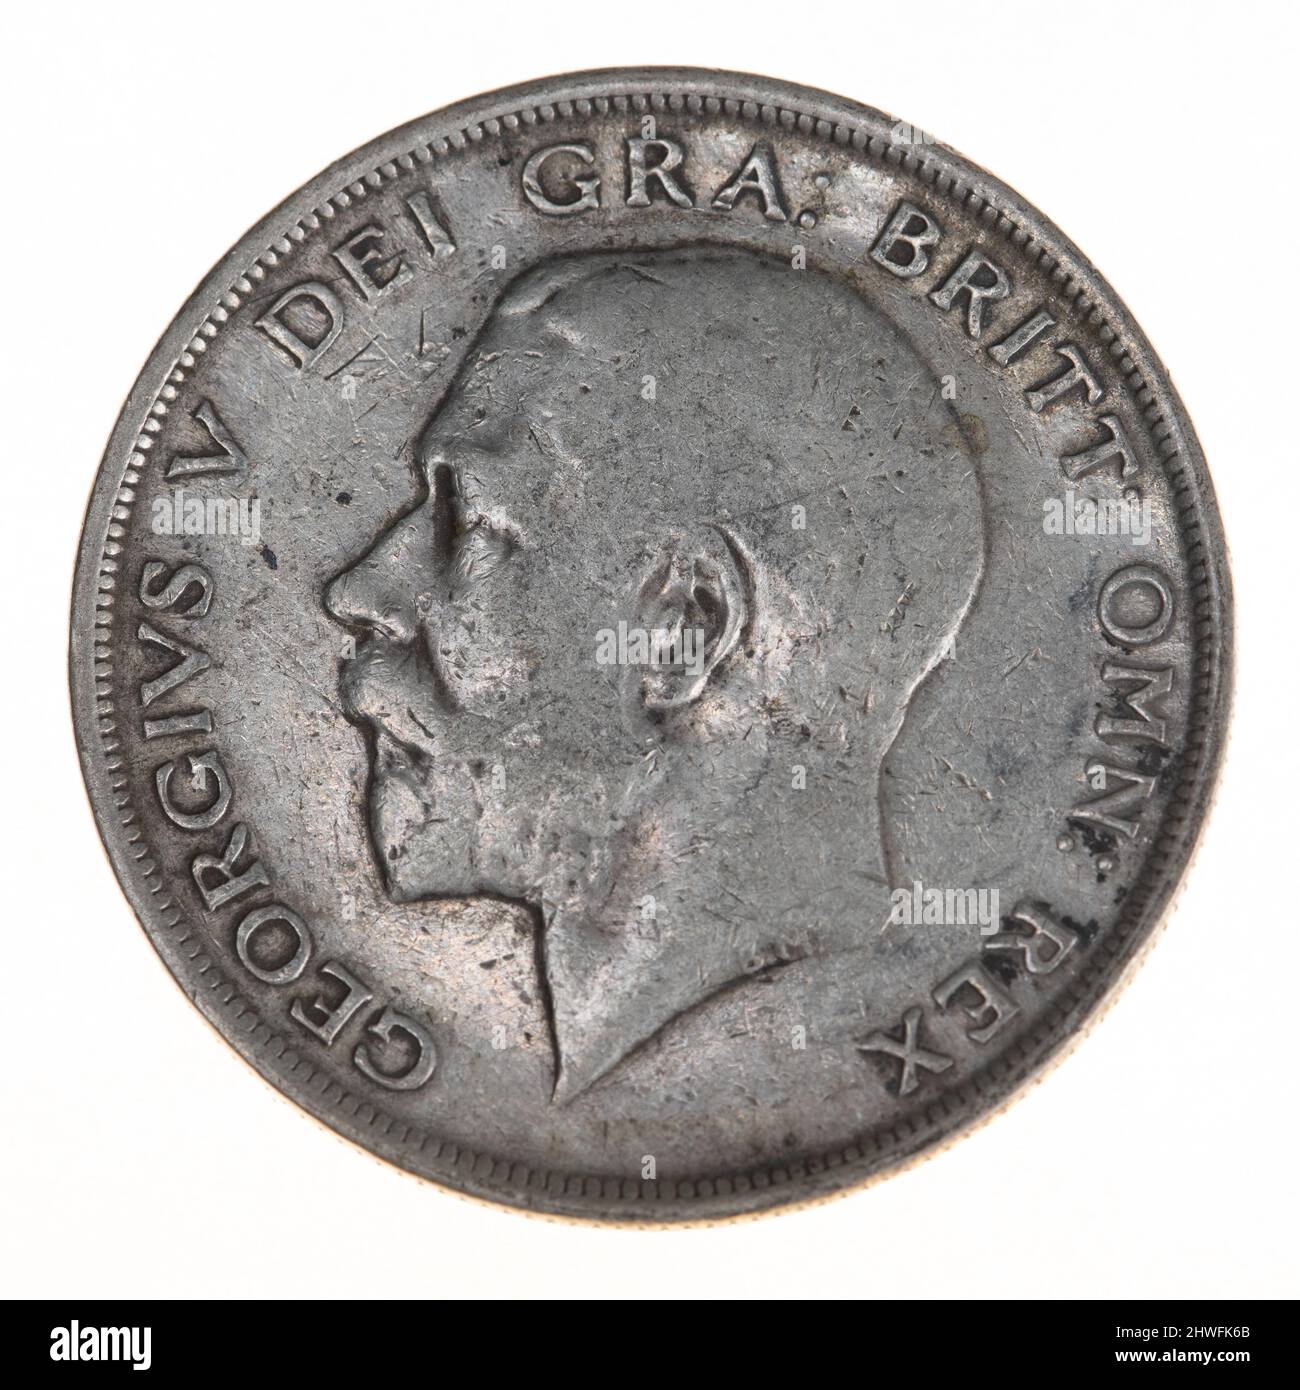 King George V Coins High Resolution Stock Photography and Images - Alamy